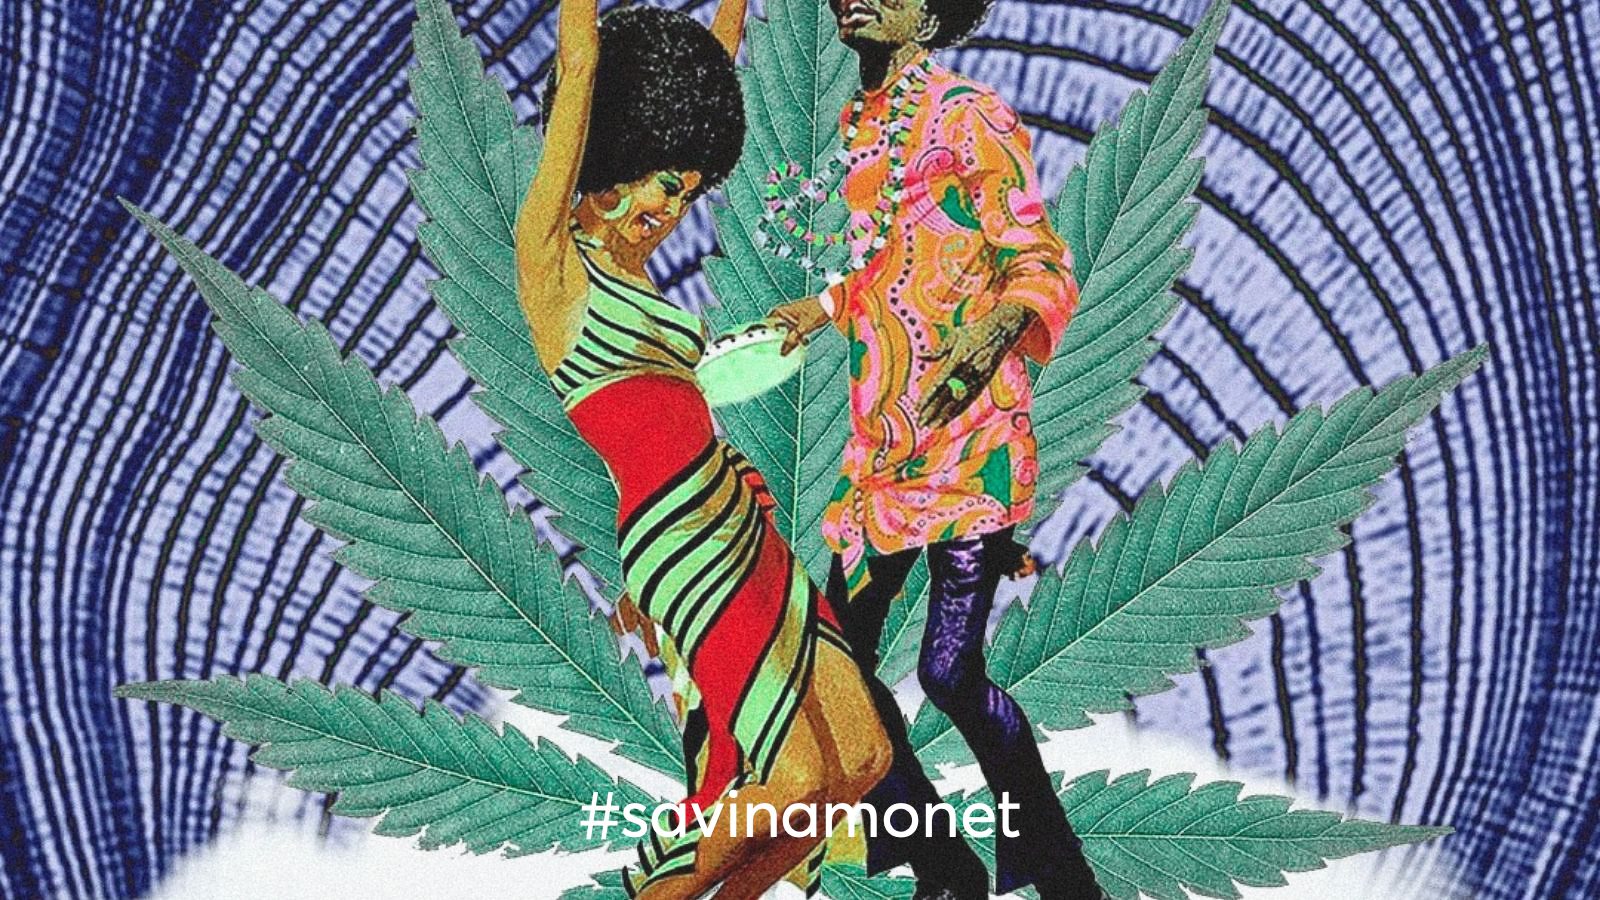 A collage art of two people dancing in front of a cannabis leaf ni 1970s disco fashion